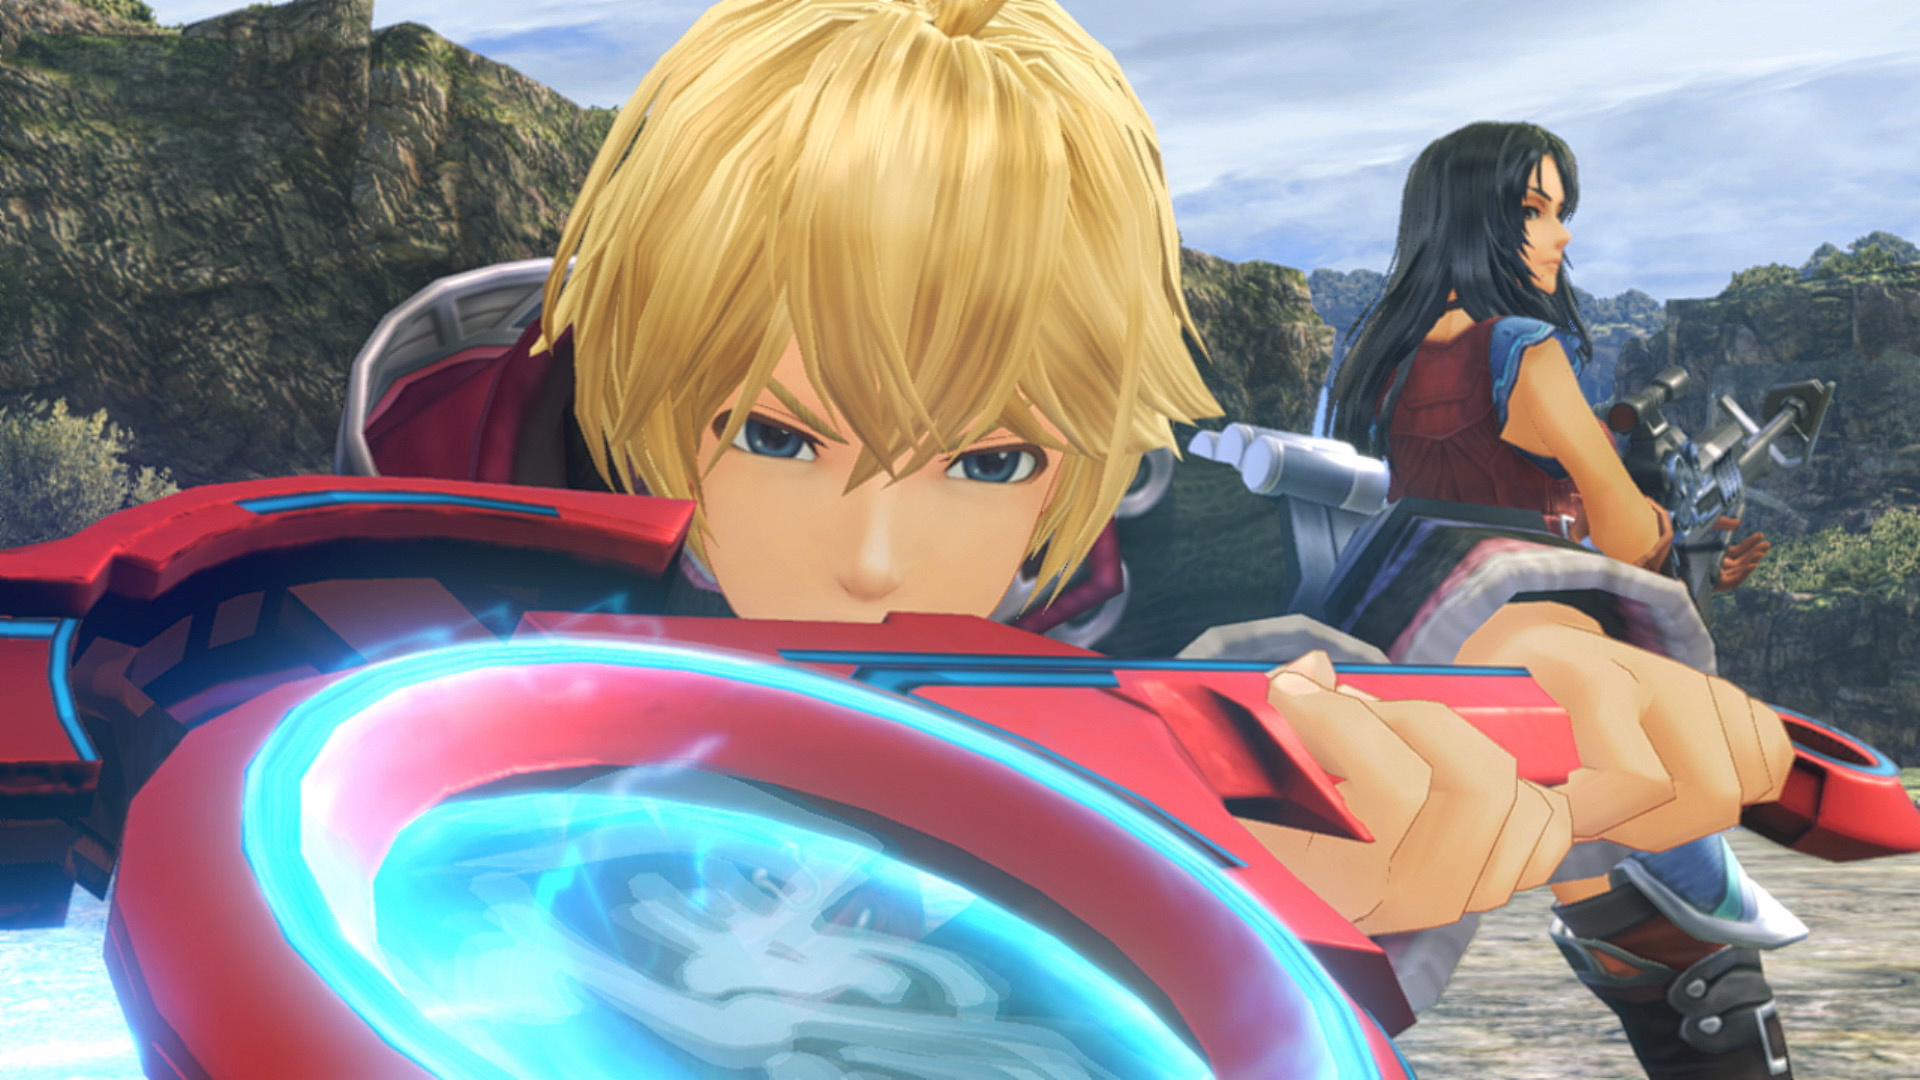 Xenoblade Chronicles Definitive Edition Version 1.1.2 Is Now Live